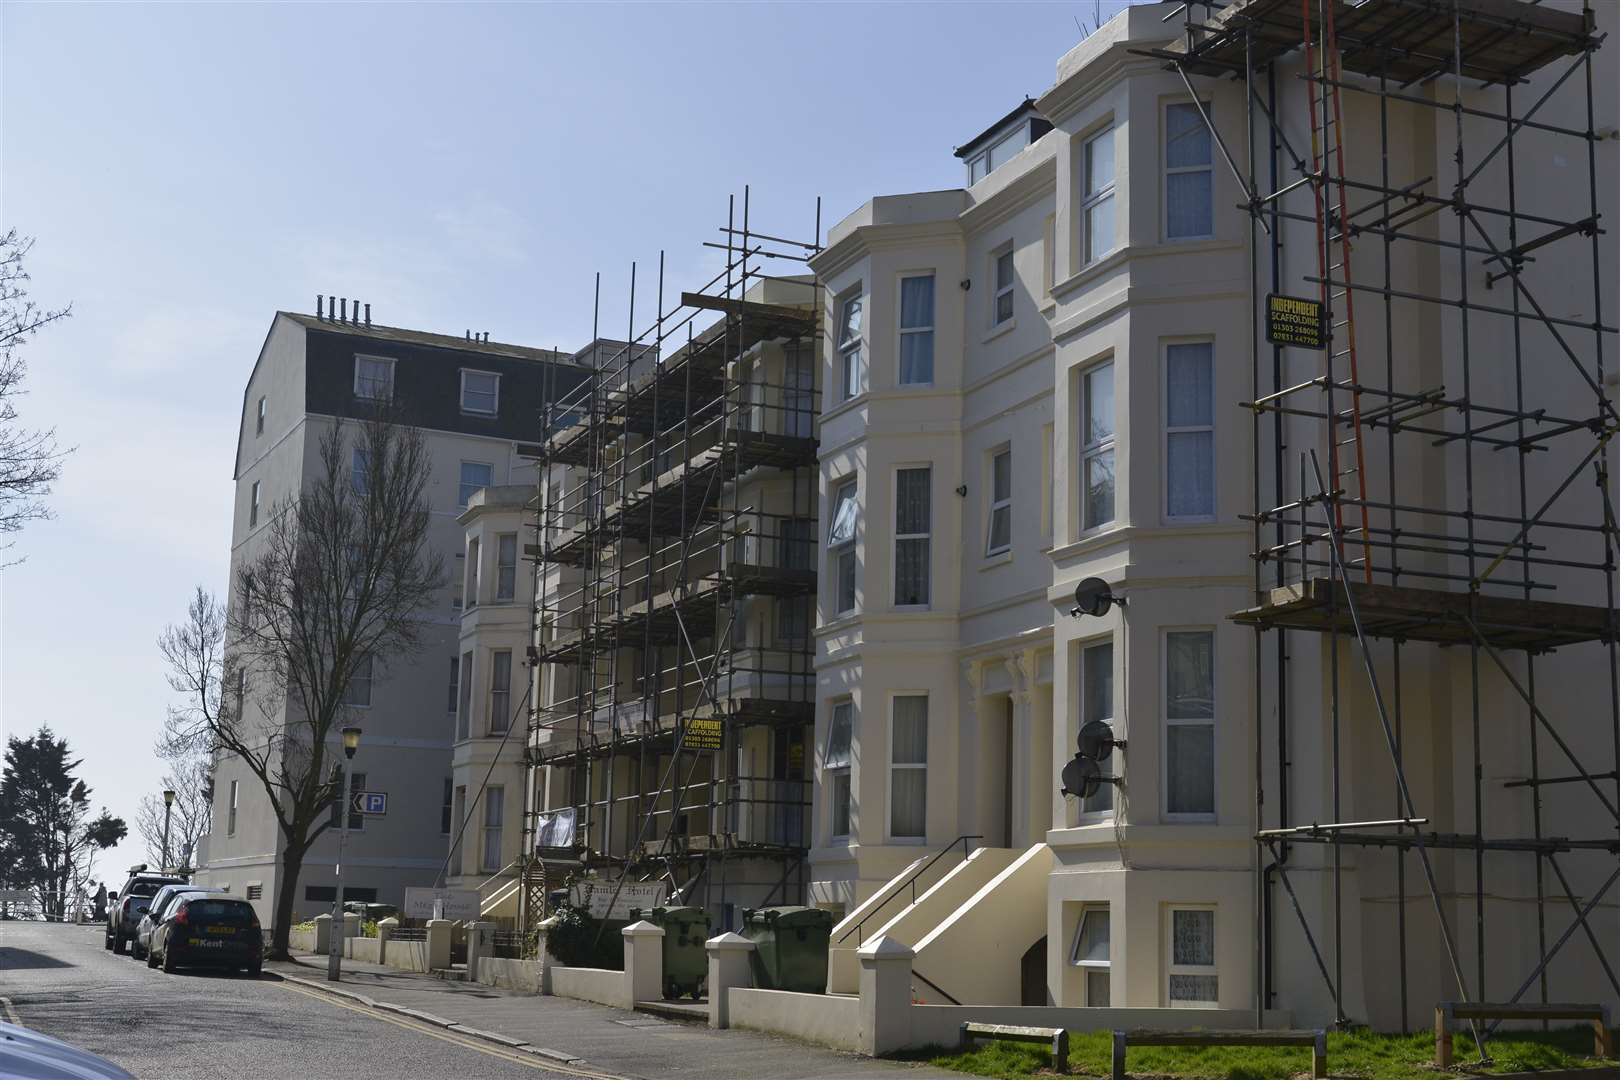 Shakespeare Terrace, Folkestone where a fire broke out in a flat. File picture